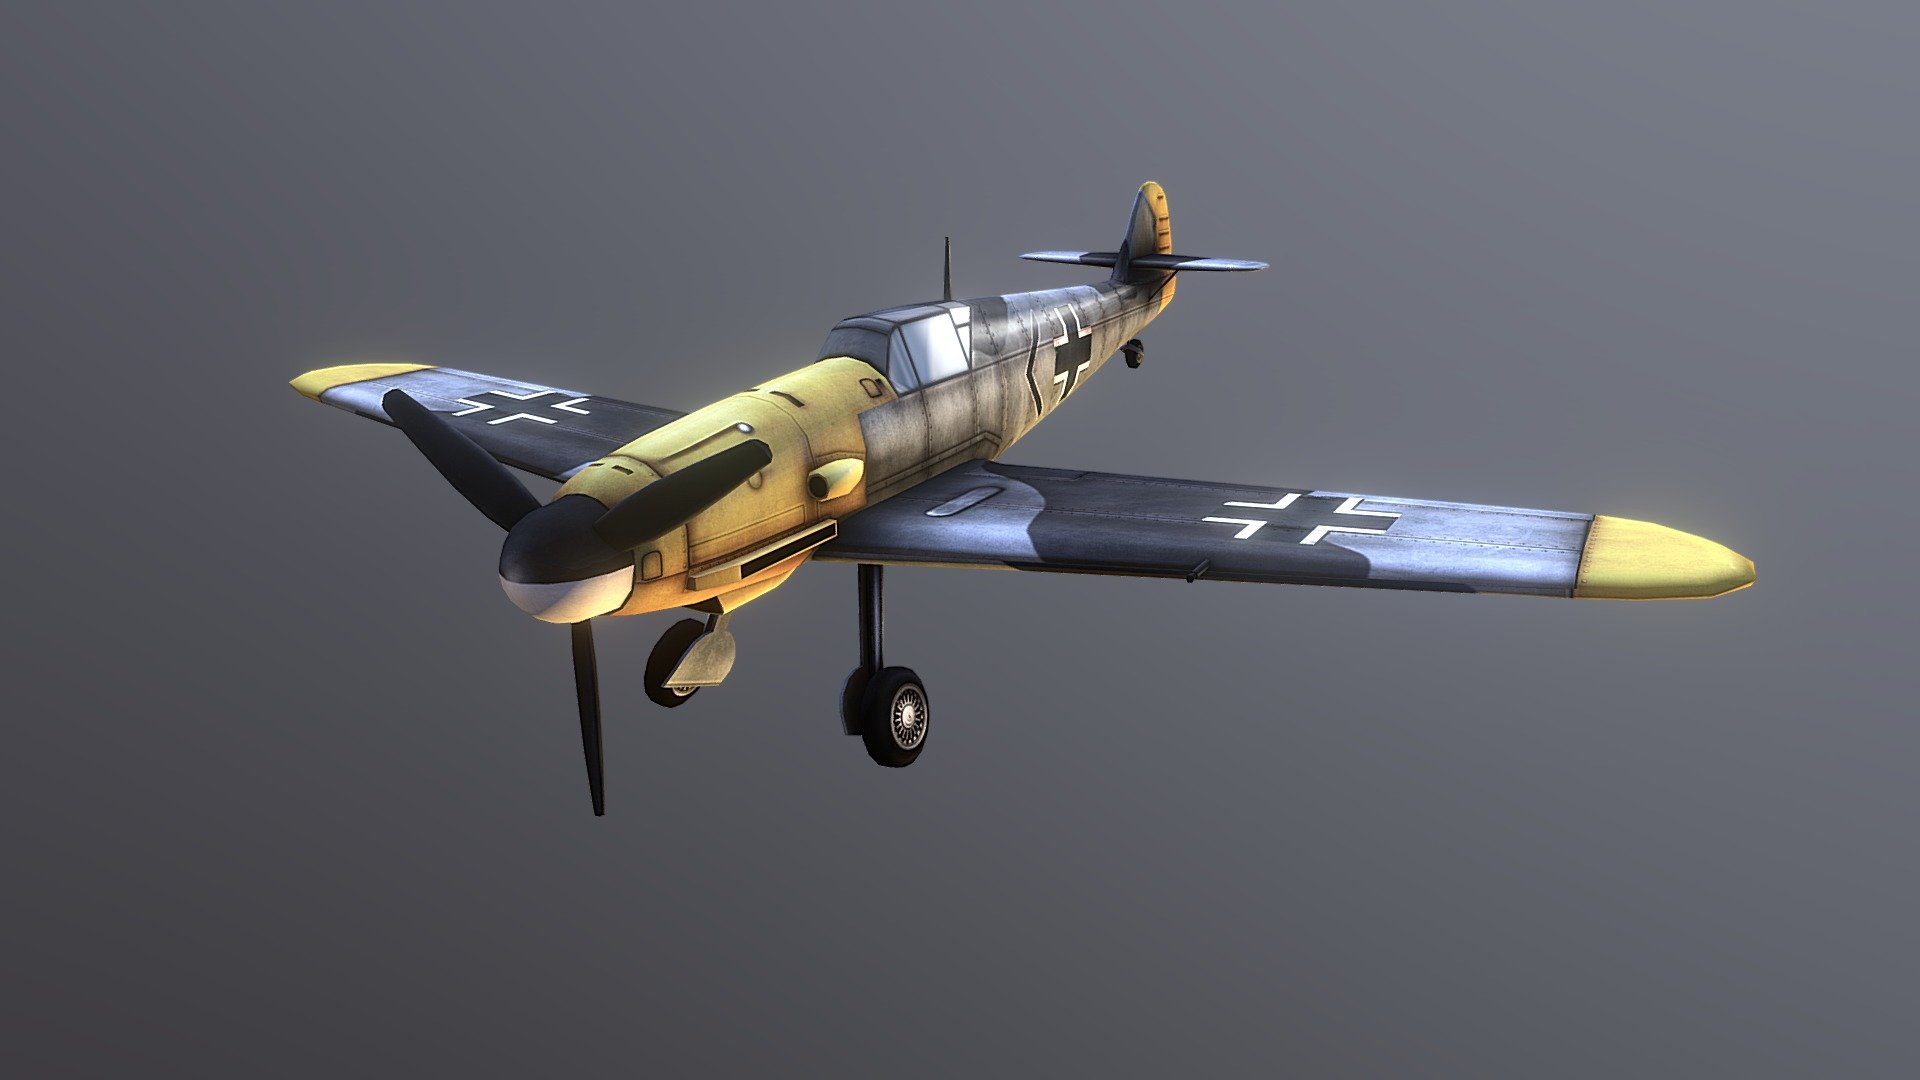 Low poly model of the German Messerschmitt Bf 109. The Bf 109 was used extensively during World War II and was considered one of the most advanced fighters when it began service in 1937. Model is split into 3 linked objects- the body, the landing gear, and the prop. Uses a 2048 x 2048 Diffuse and Specular map. 

Formats-OBJ and FBX - Messerschmitt Bf 109 - Buy Royalty Free 3D model by JonLundy3D 3d model